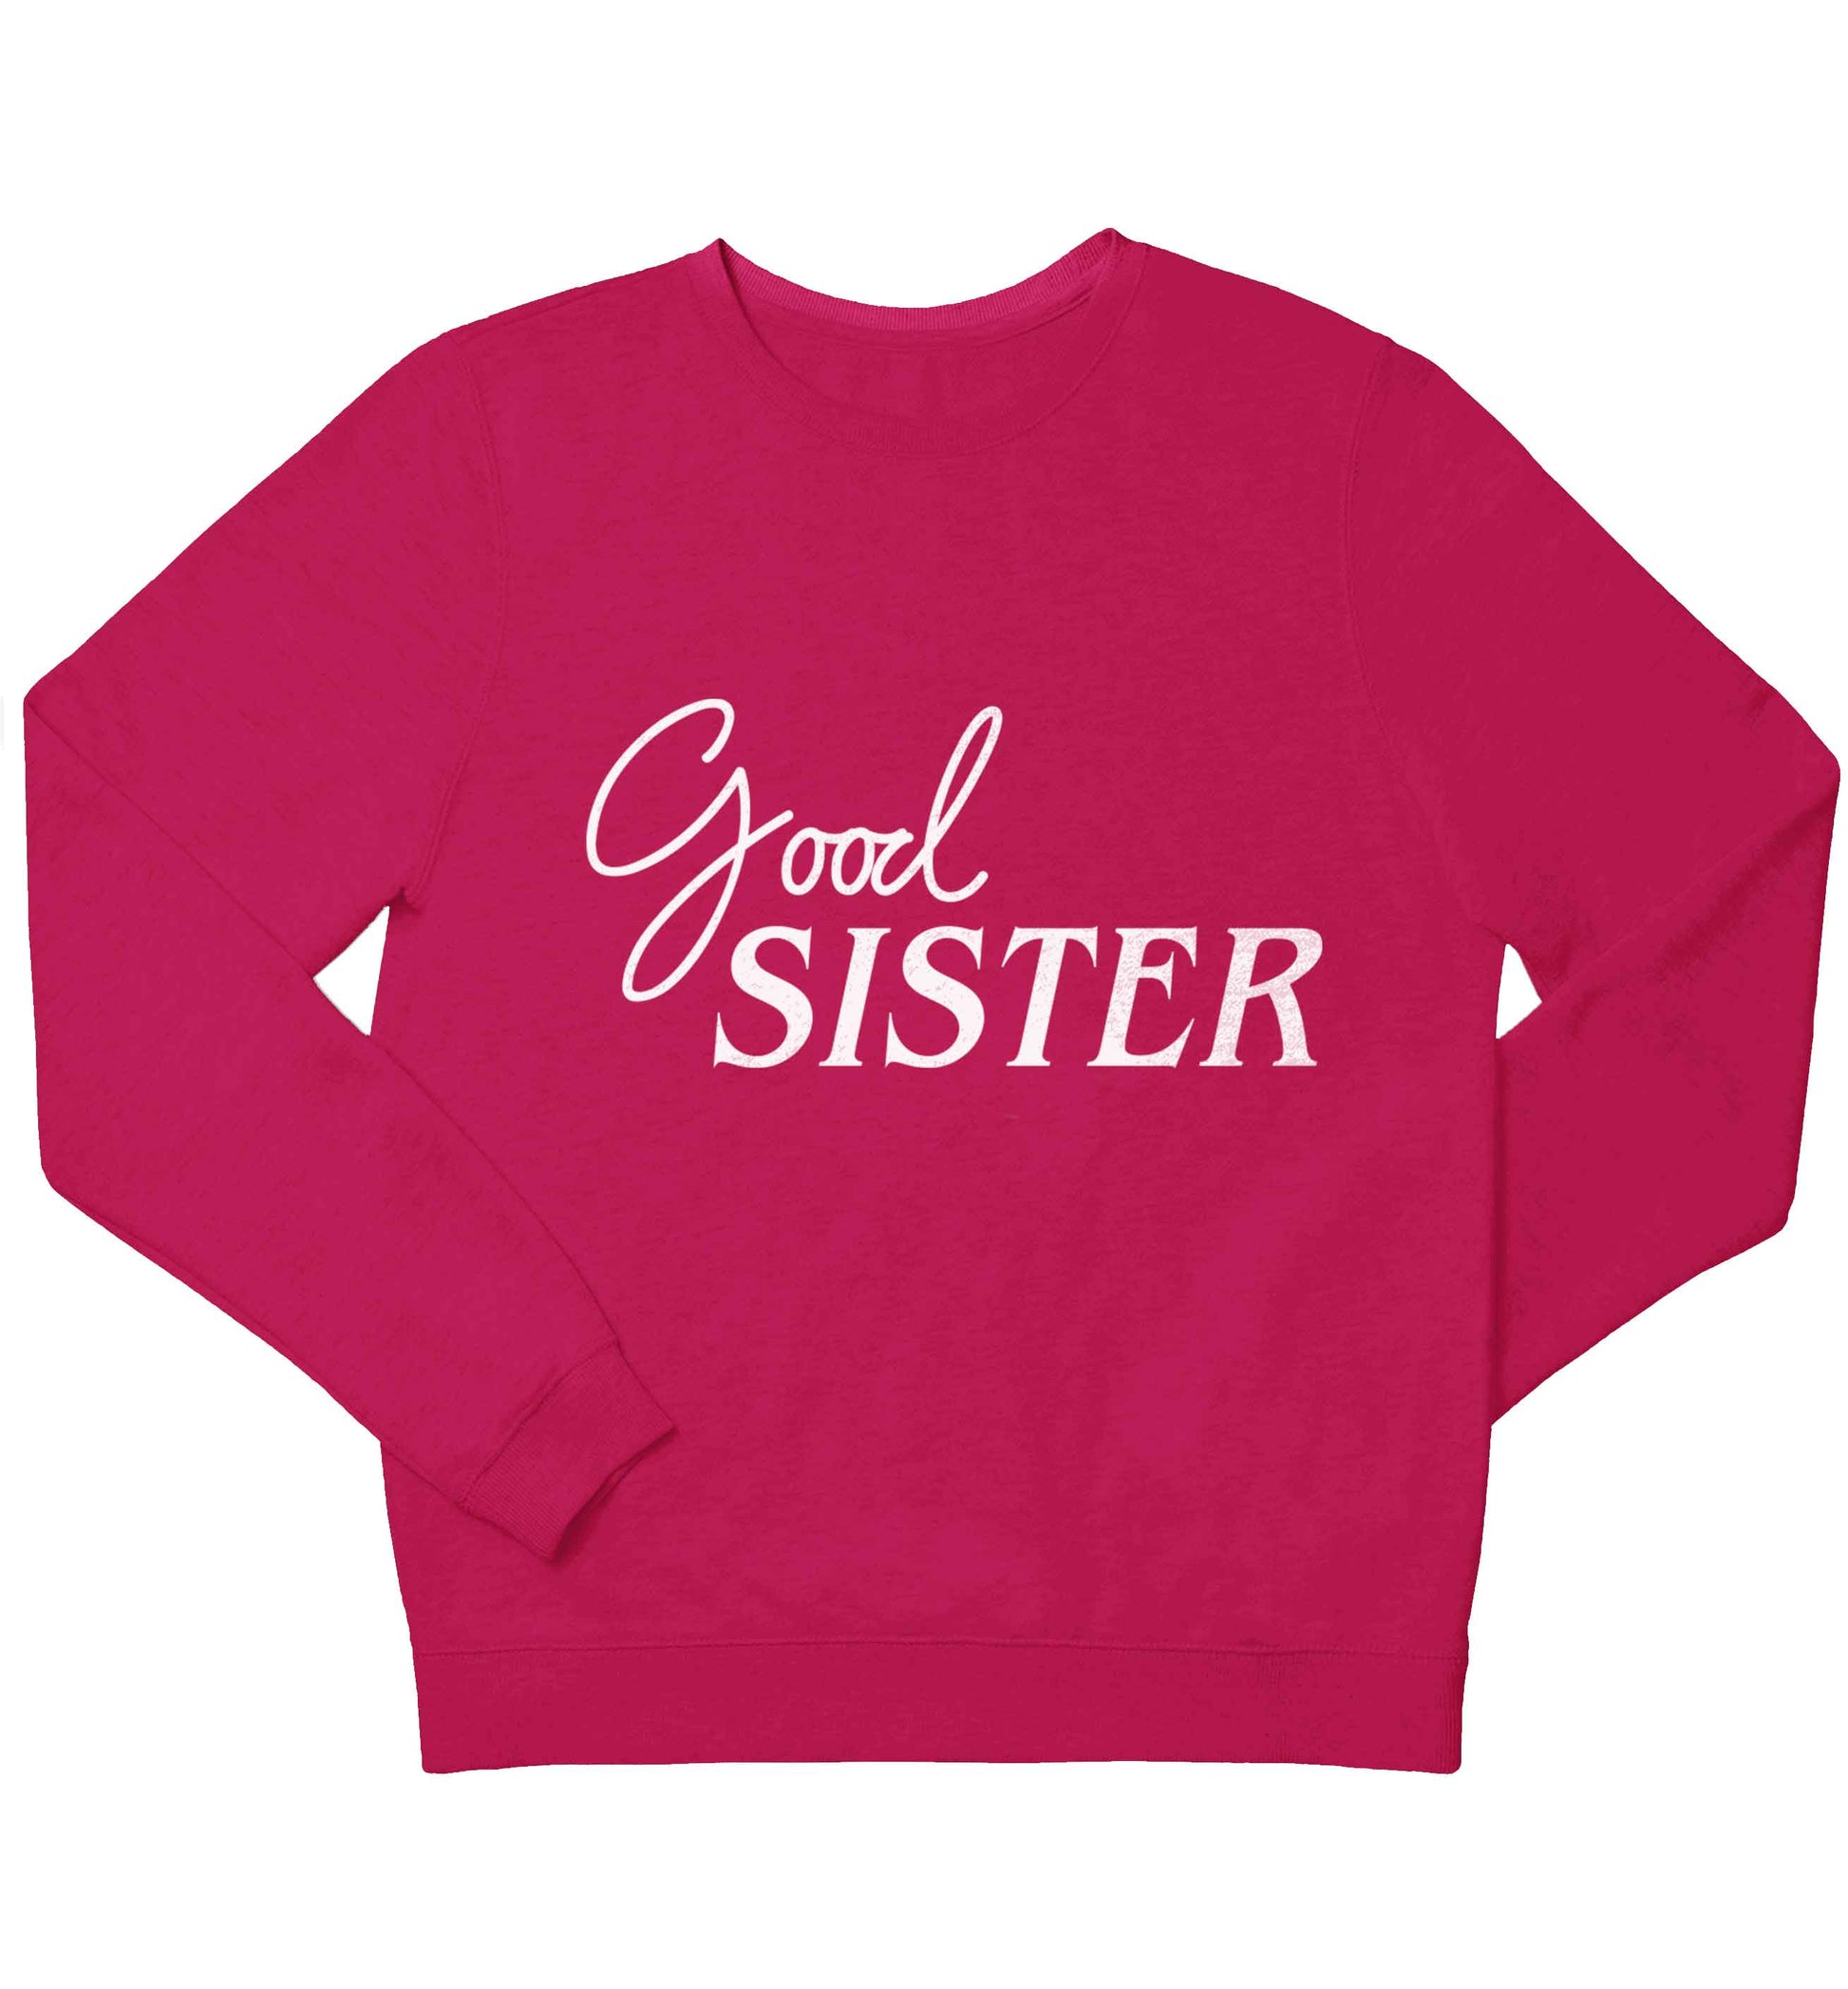 Good sister children's pink sweater 12-13 Years